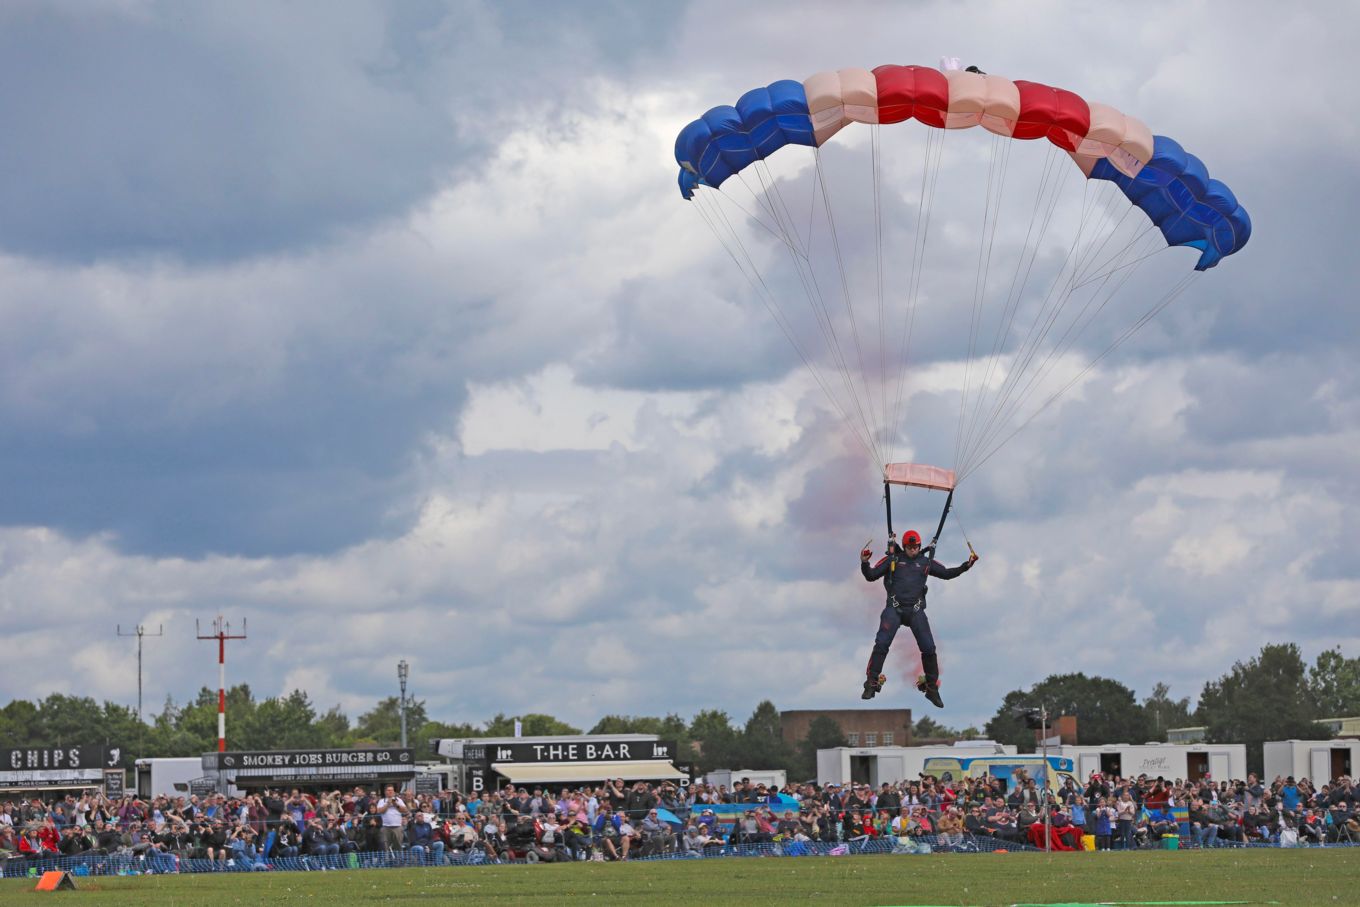 Sergeant Cartwright, coming into land at the Drop Zone at Cosford Air Show